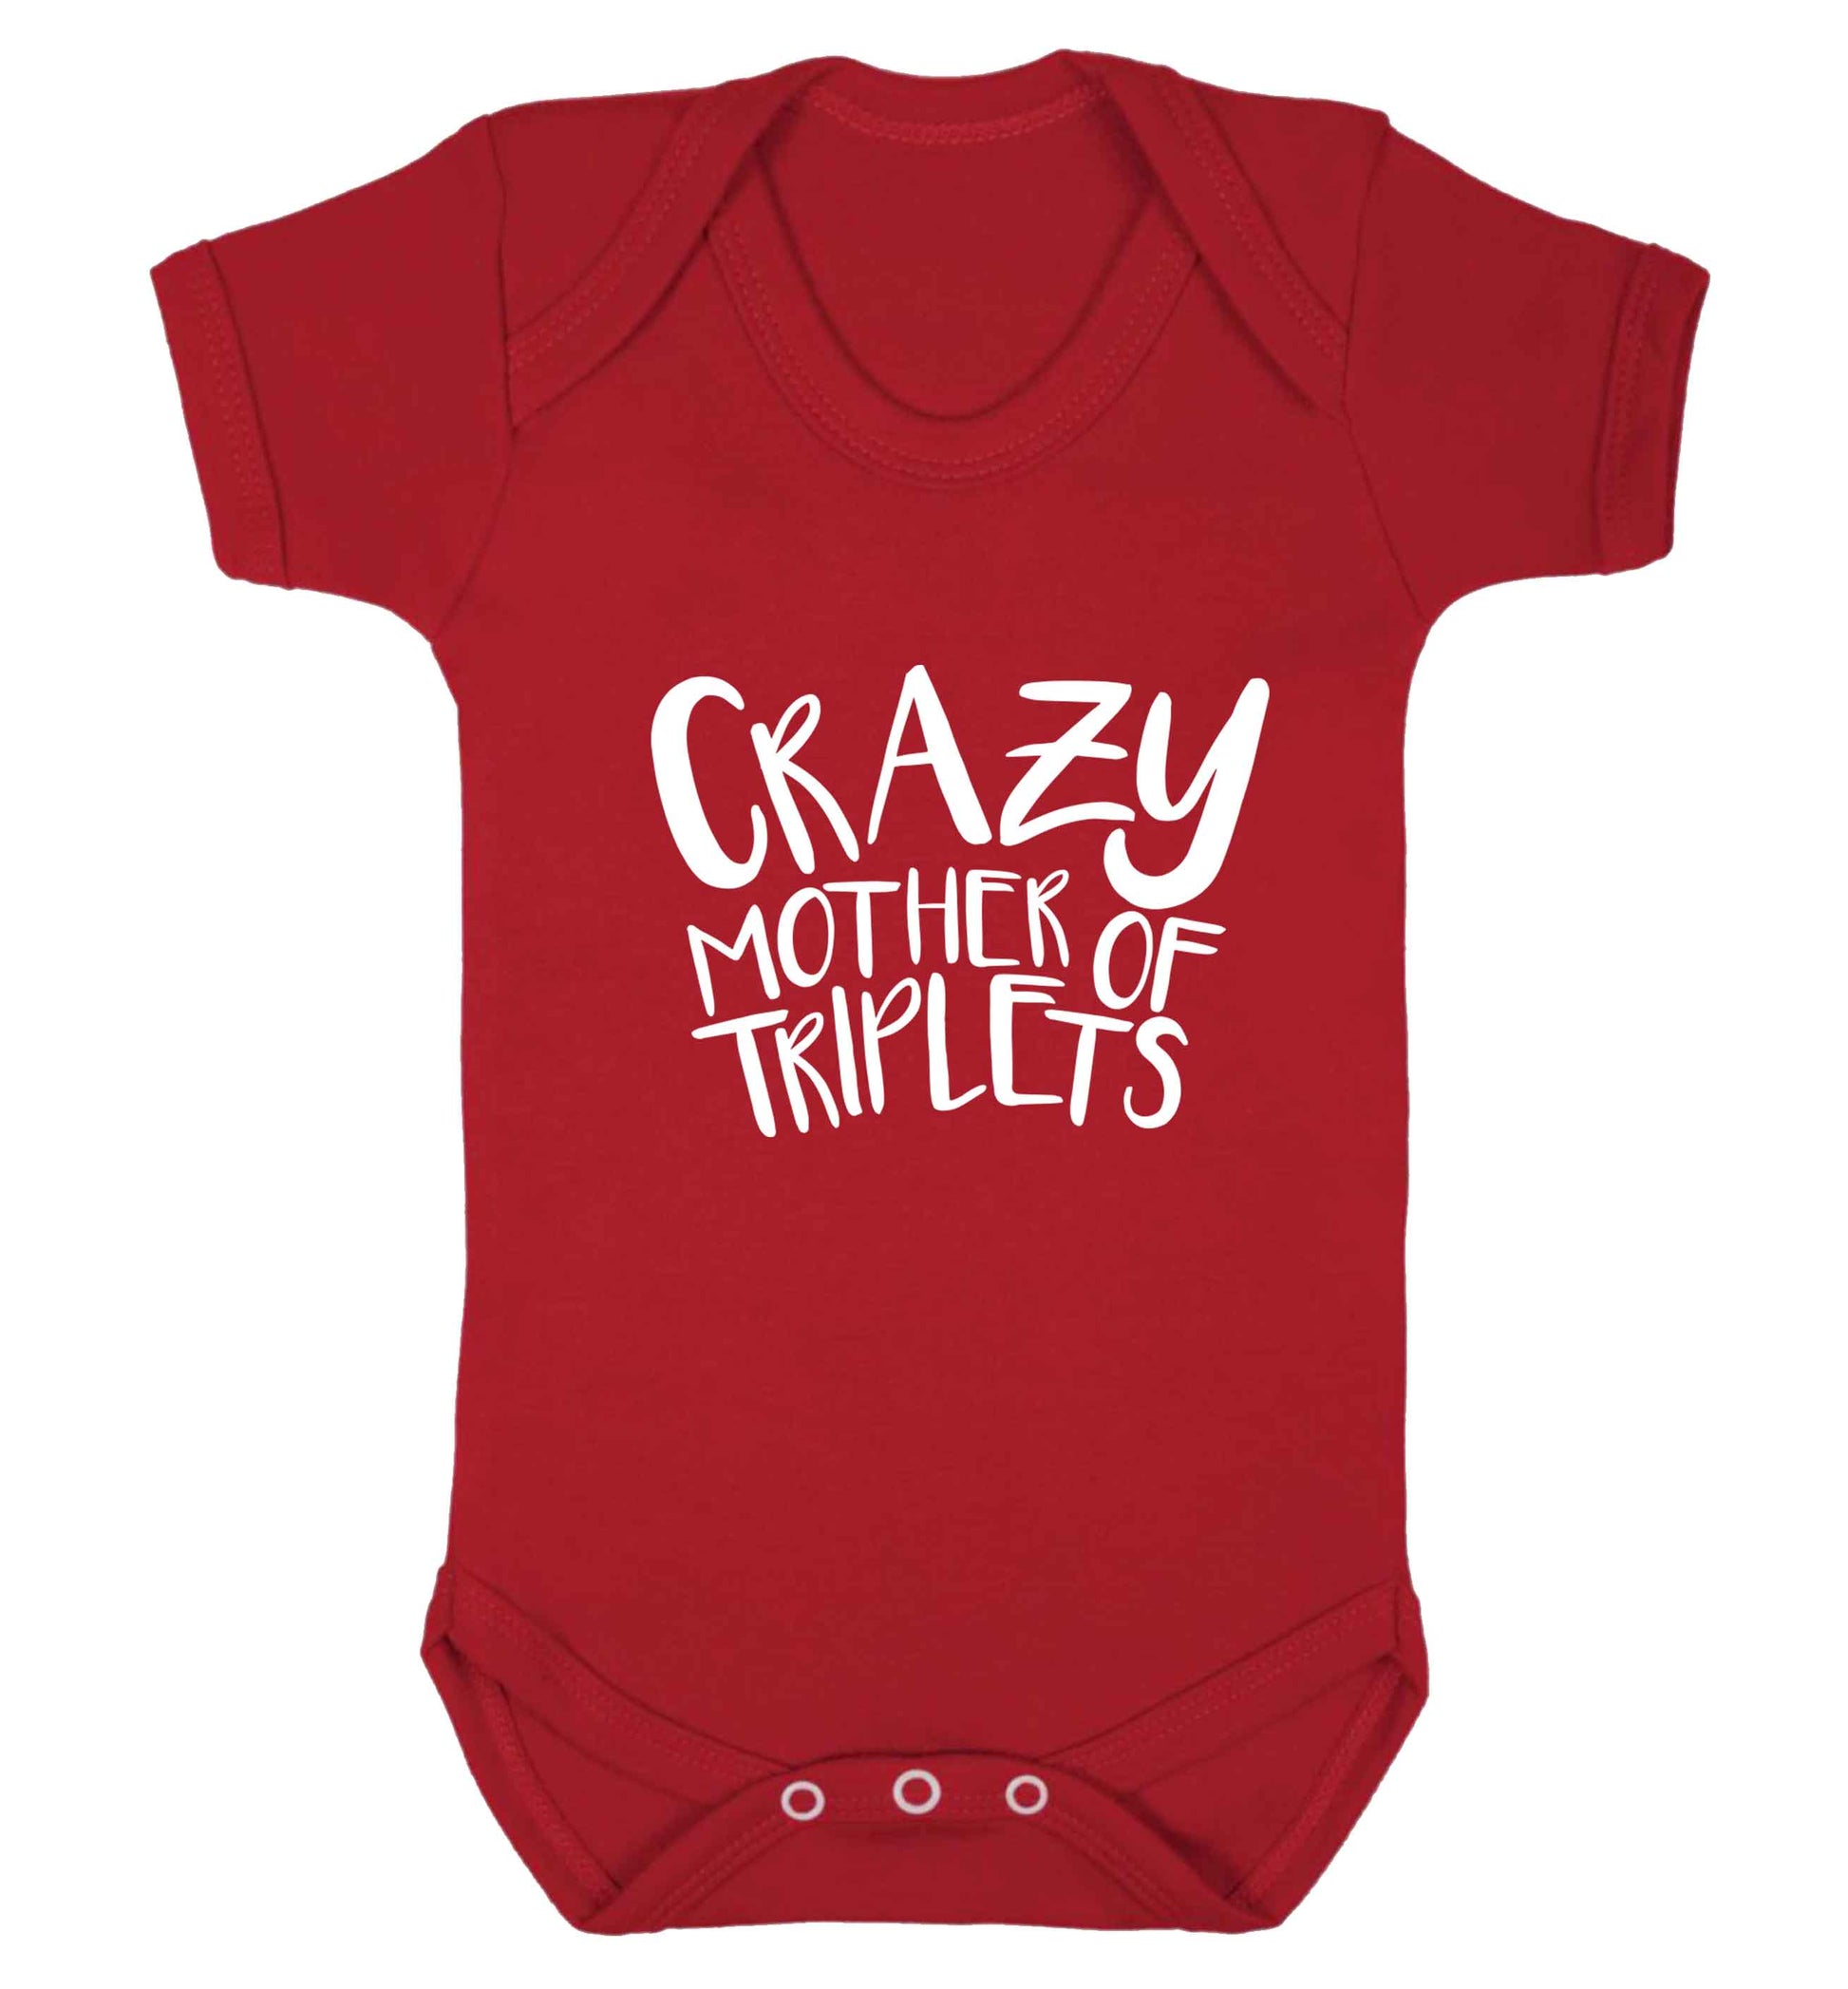 Crazy mother of triplets baby vest red 18-24 months